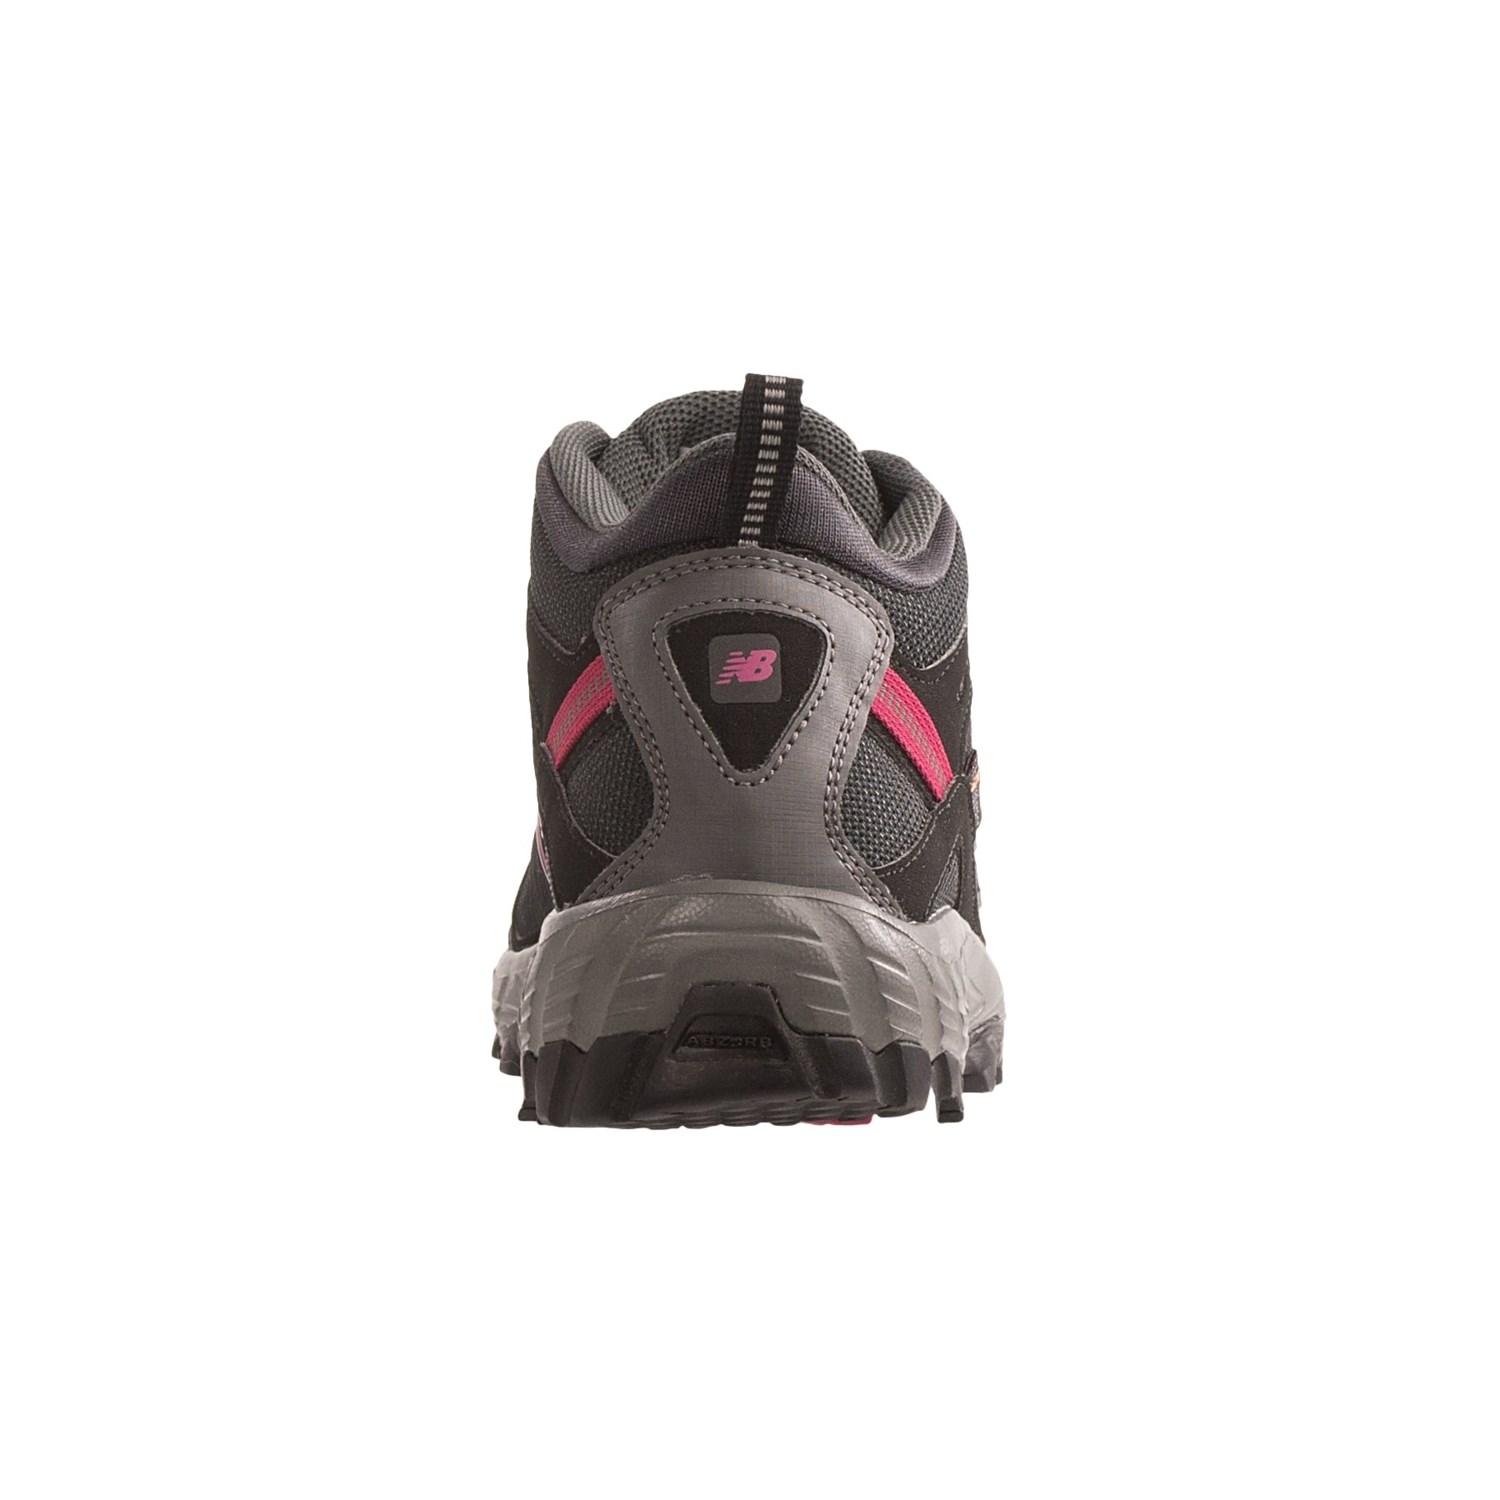 New Balance 790 Trail Hiking Boots (For Women) 8135X - Save 25%